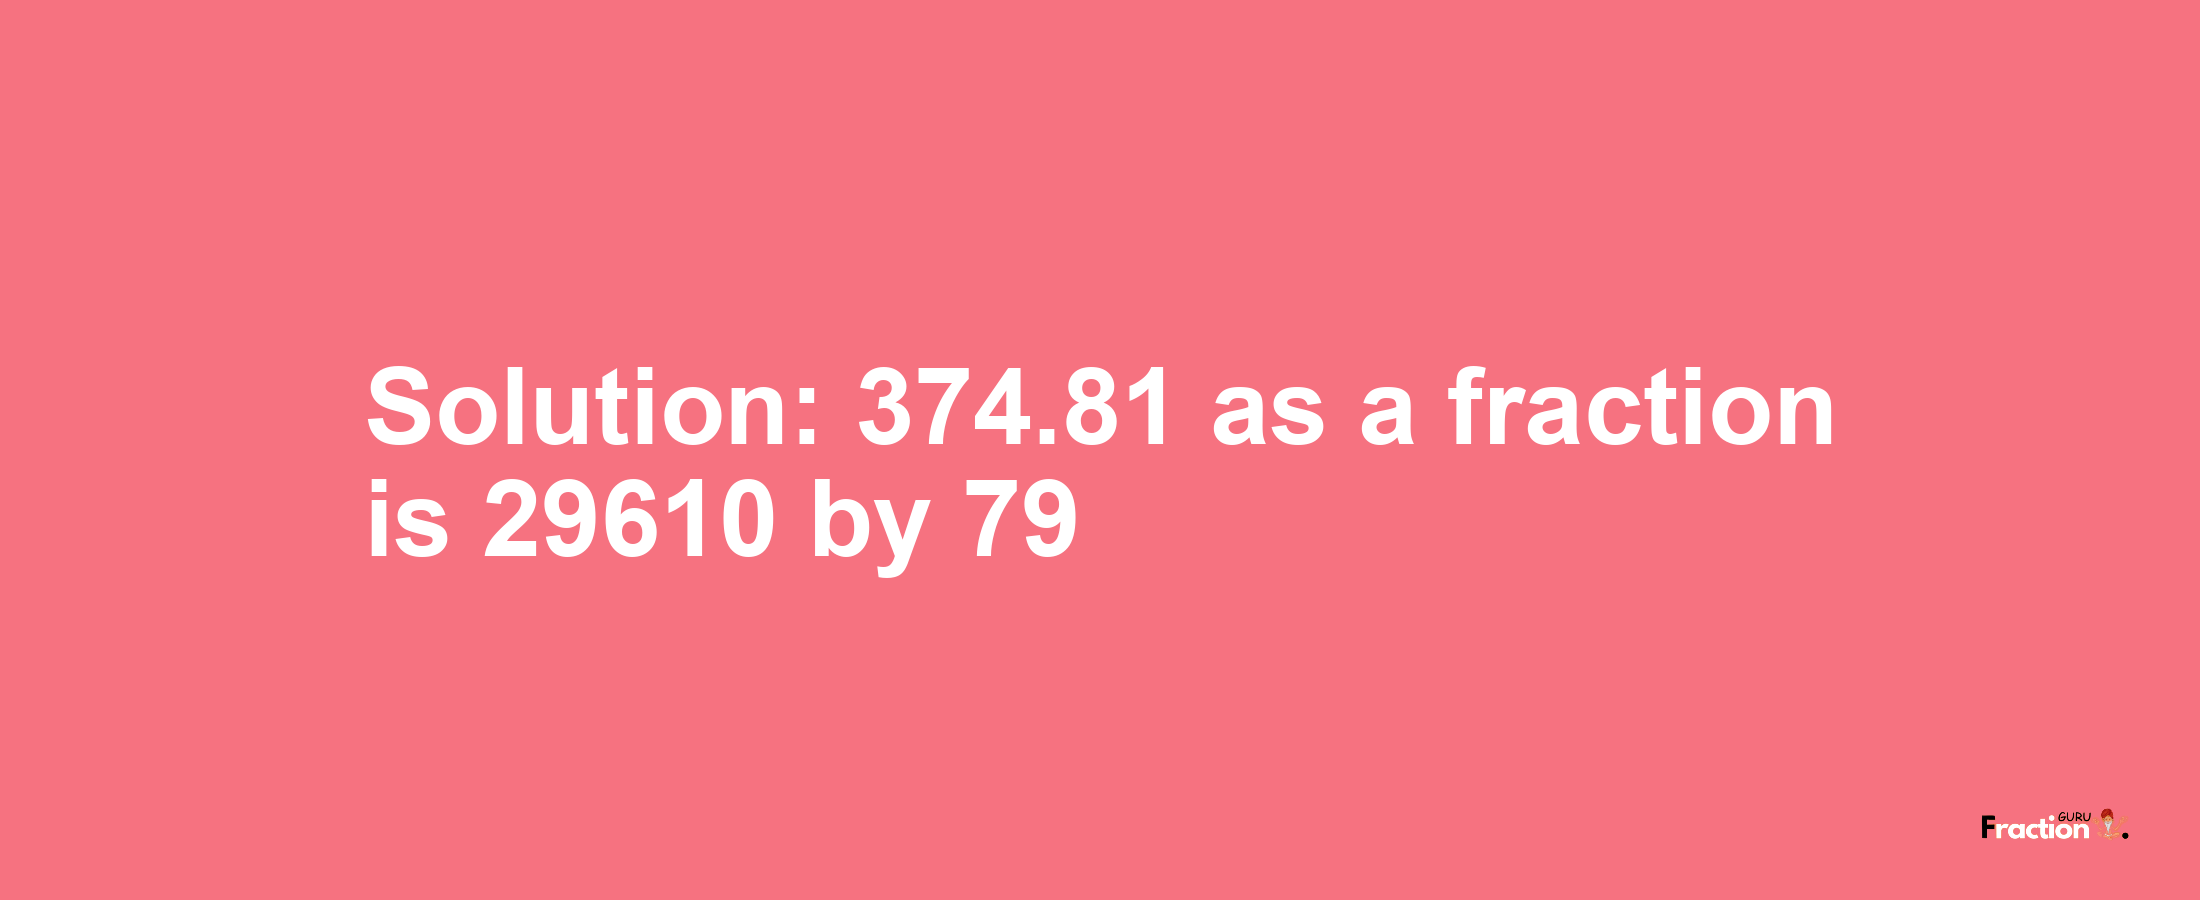 Solution:374.81 as a fraction is 29610/79